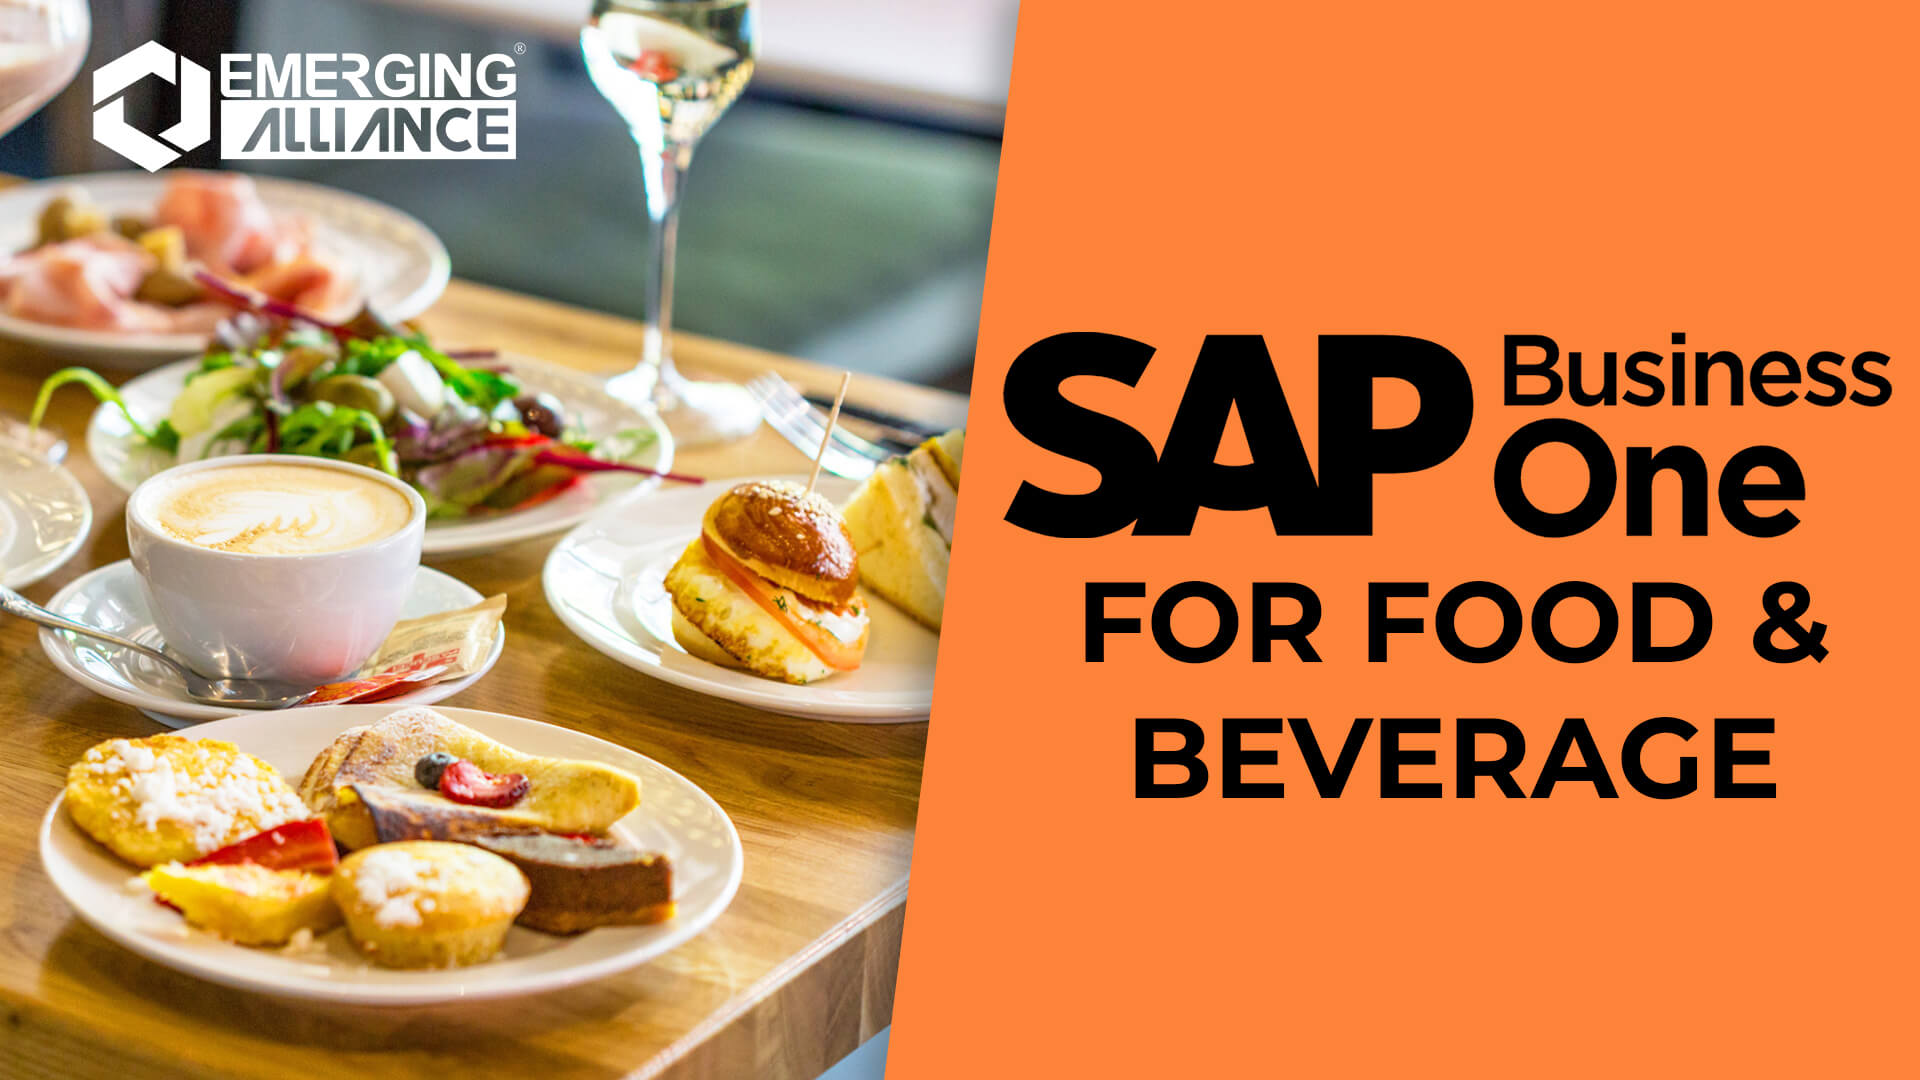 sap business one for food & beverage